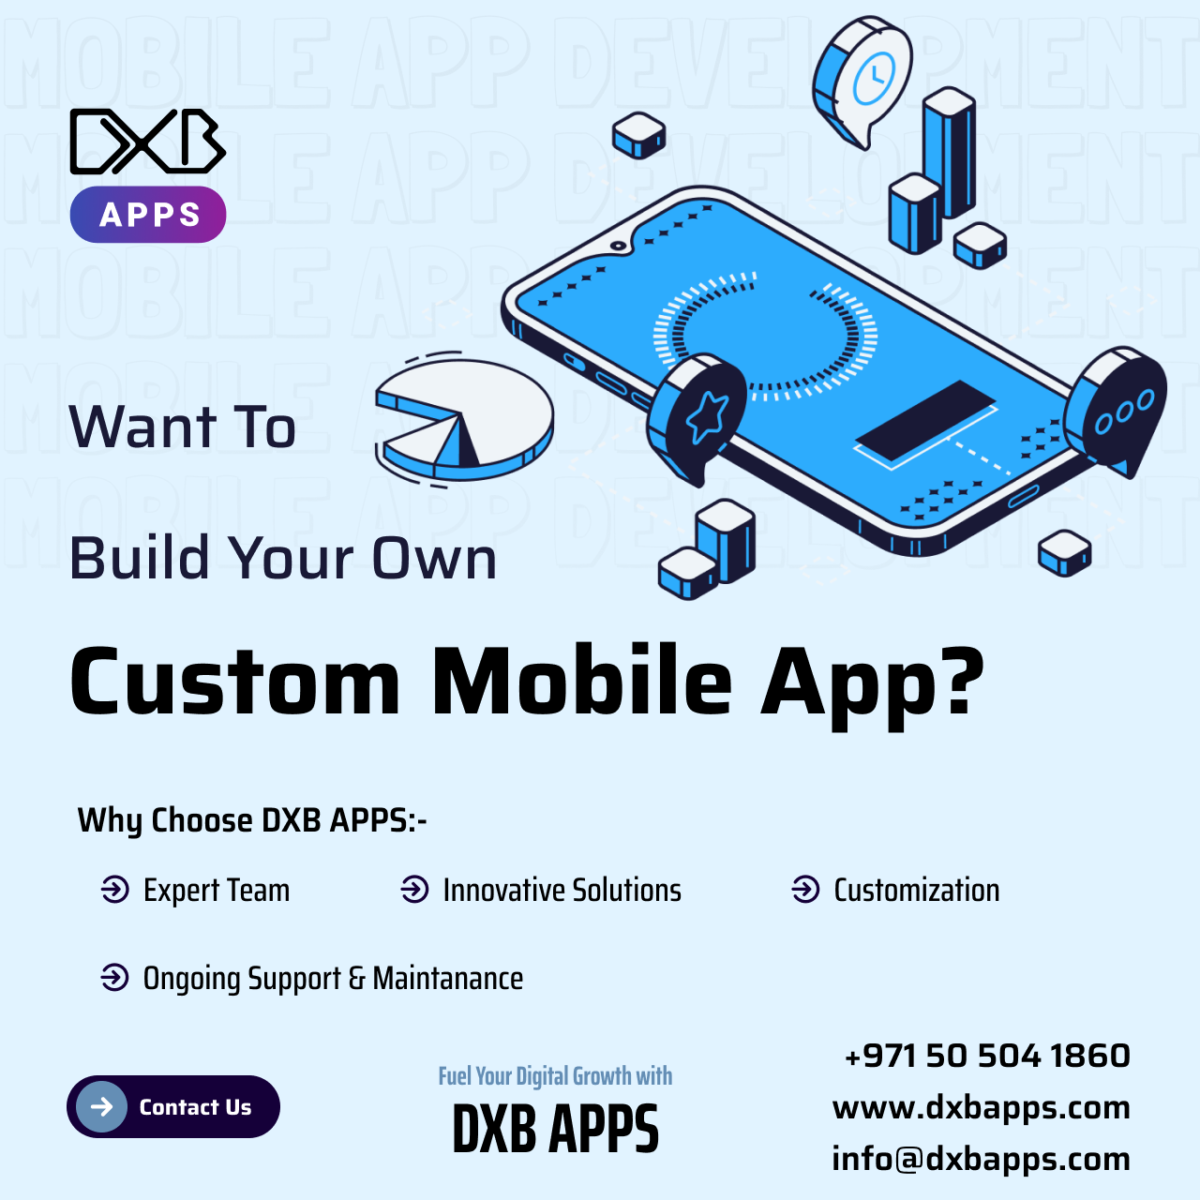 DXB APPS- Your Go-To Source for Expert App Development Abu Dhabi